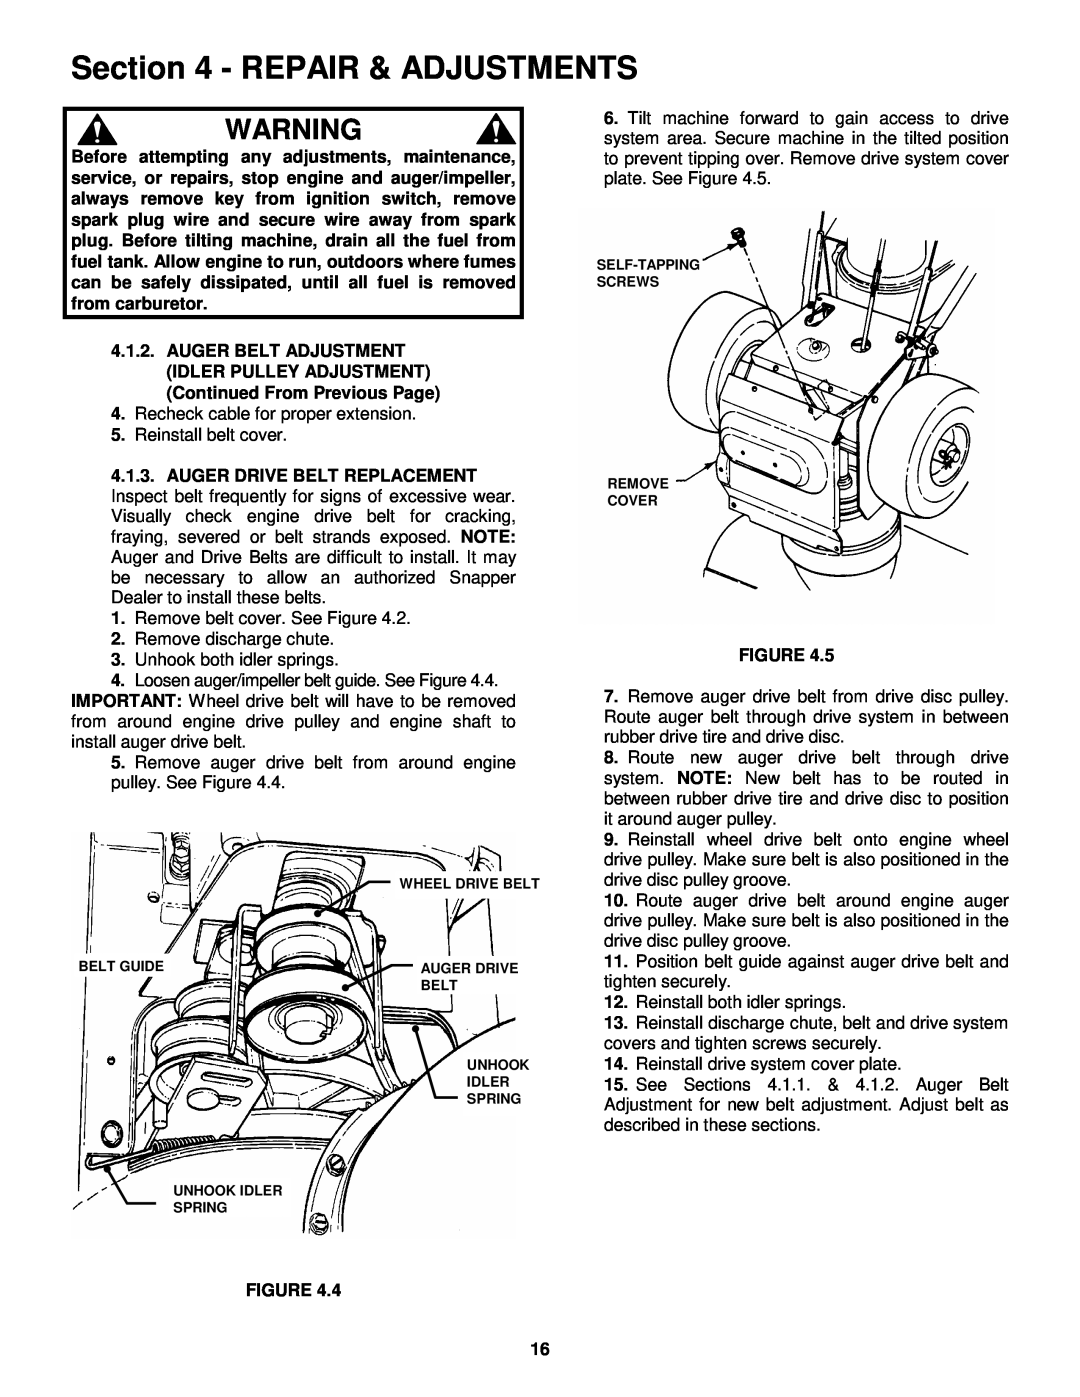 Snapper E9265, E11305 important safety instructions Repair & Adjustments 